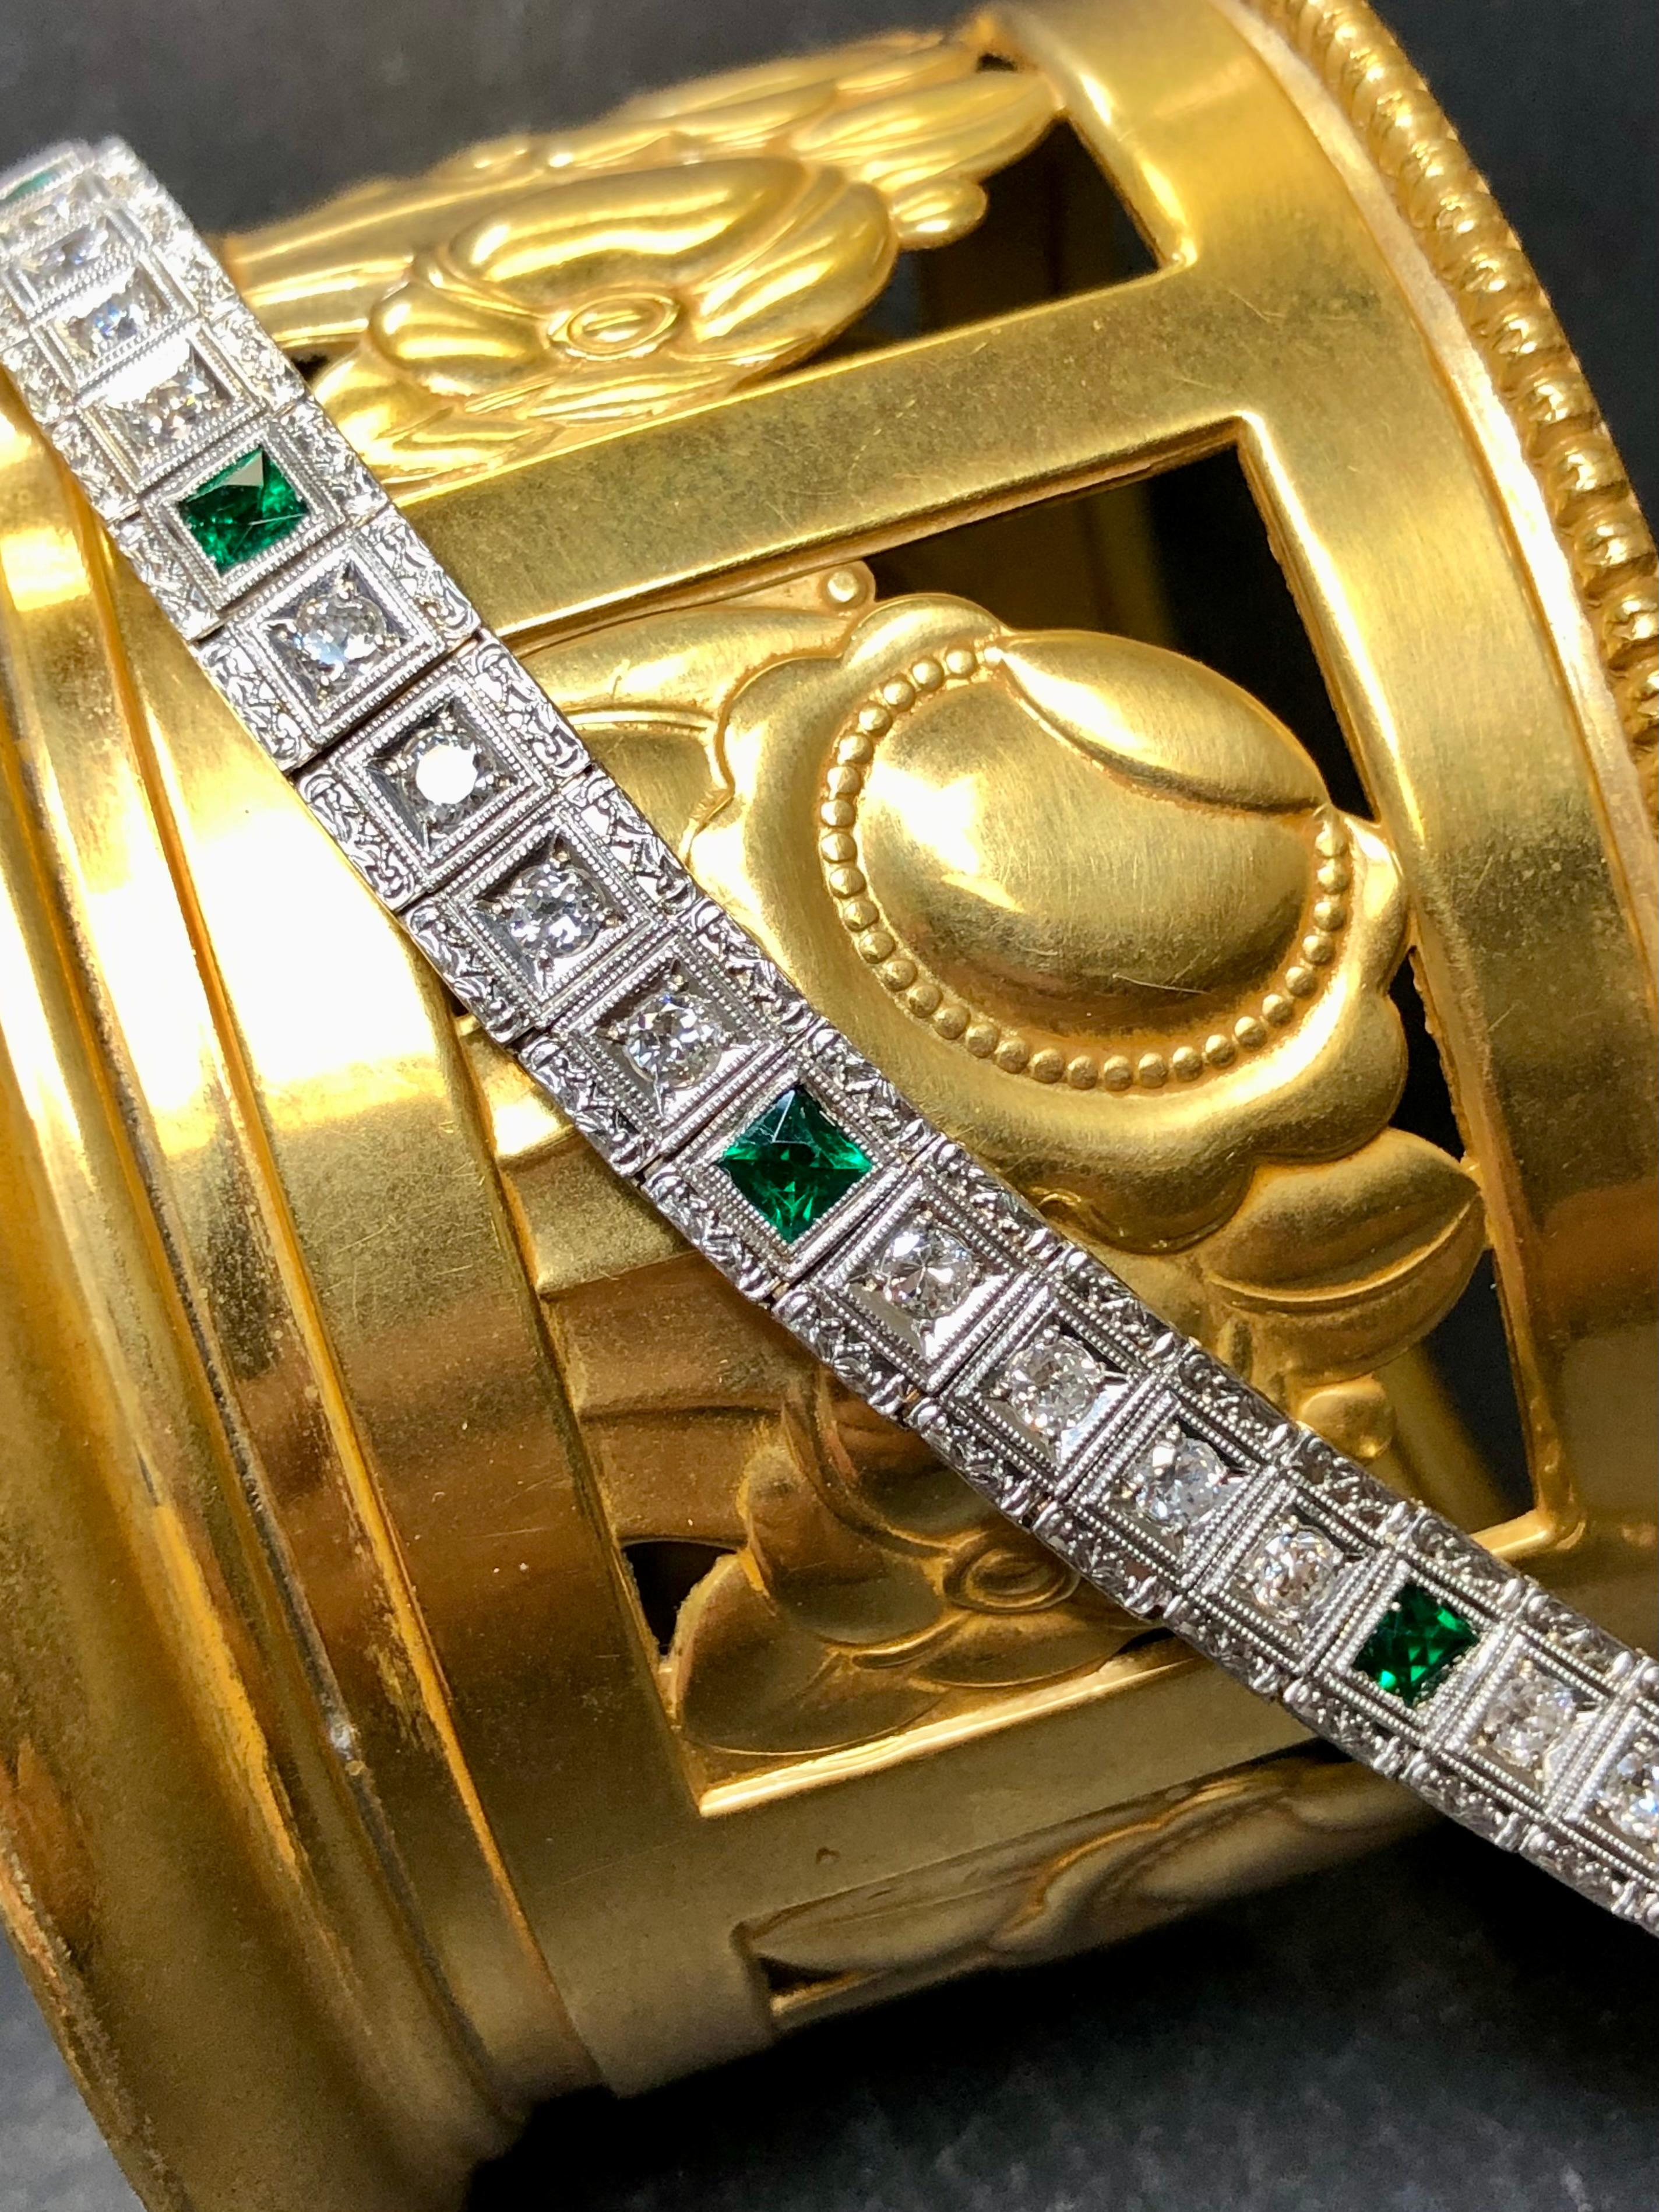 An original line bracelet from the Art Deco era done in 14K white gold and set with approximately 2.80cttw in all original old European cut diamonds averaging G-I in color and Vs1-2 in clarity. There are also 7 square cut synthetic emeralds bezel